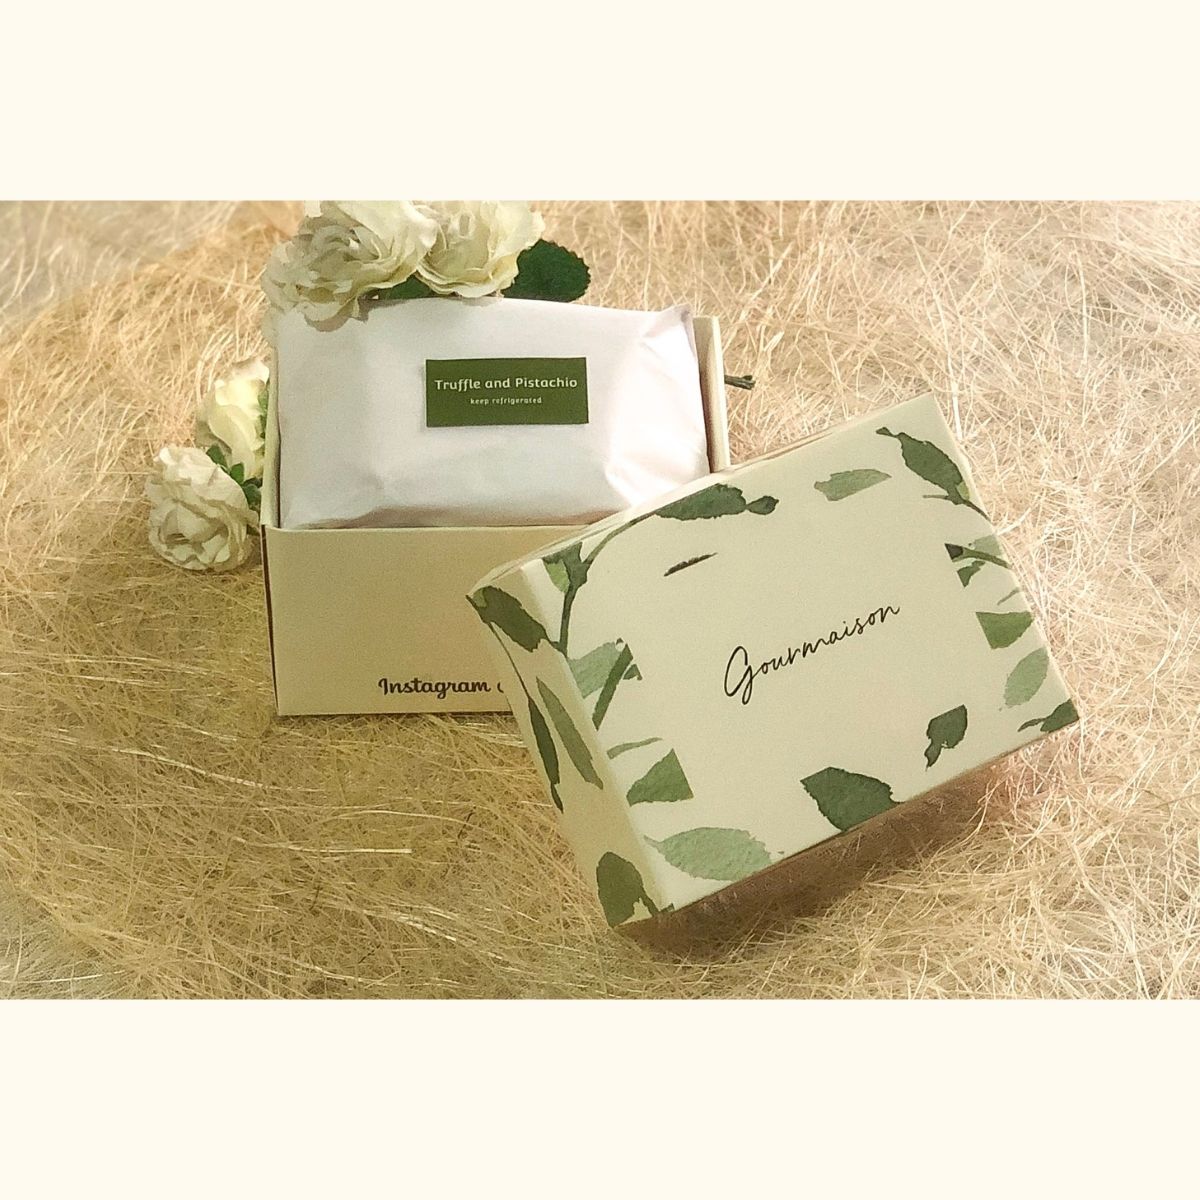 Image for cheese packaging, the cheese is packed in special paper and a branded high quality box